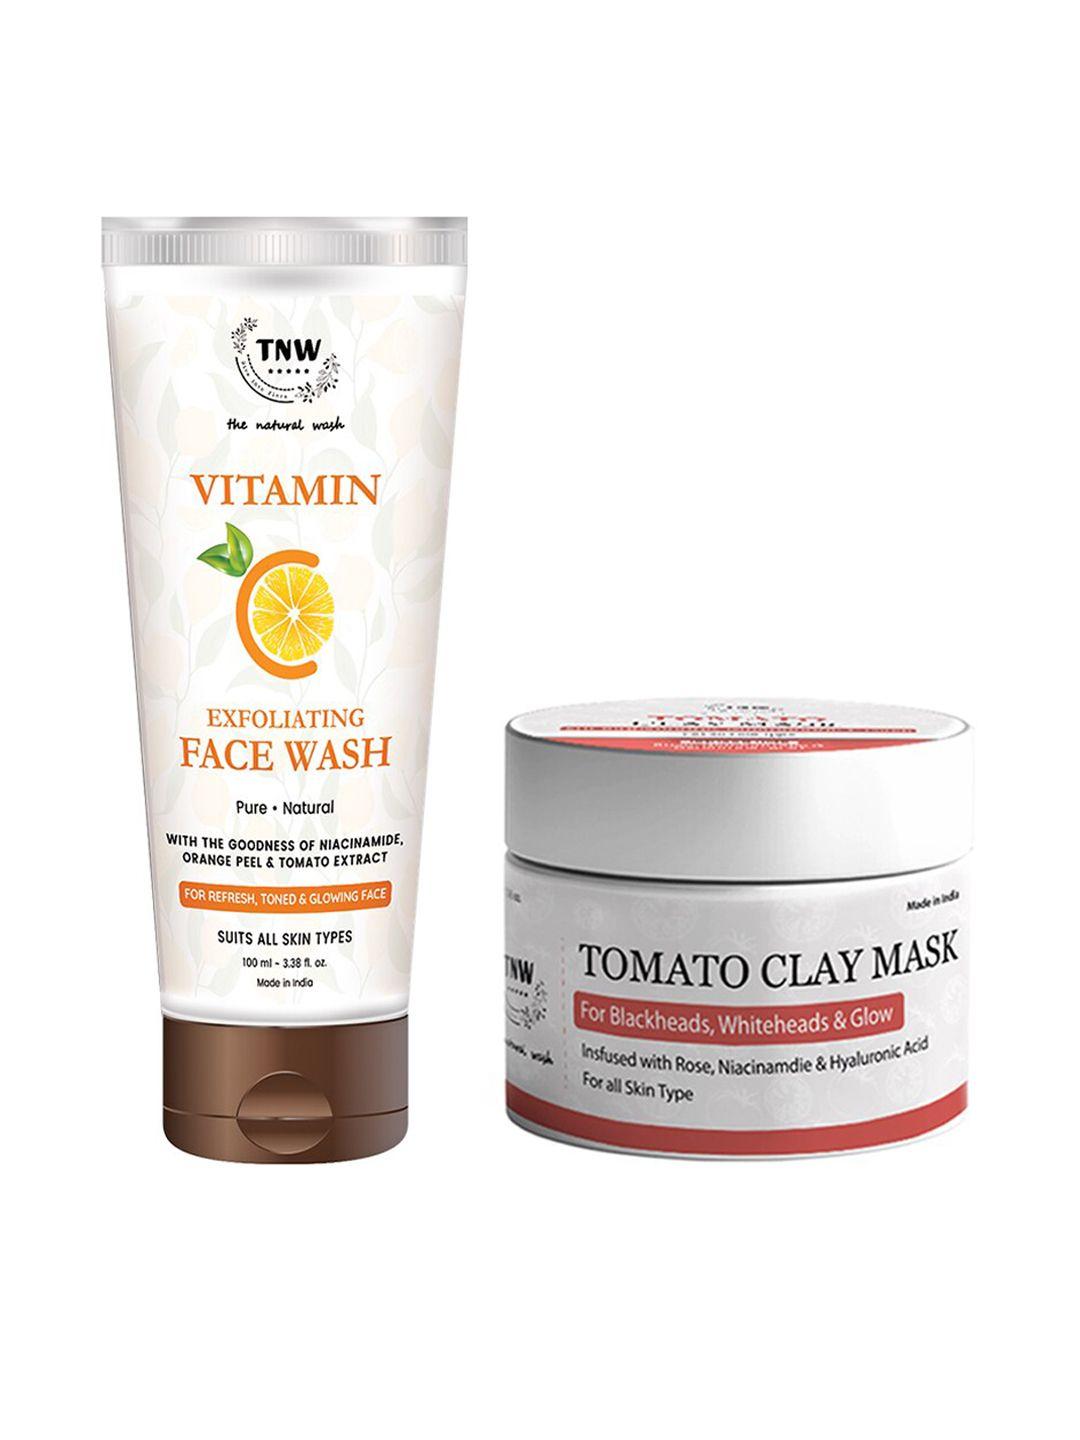 tnw the natural wash set of tomato clay mask & vitamin c exfoliating face wash